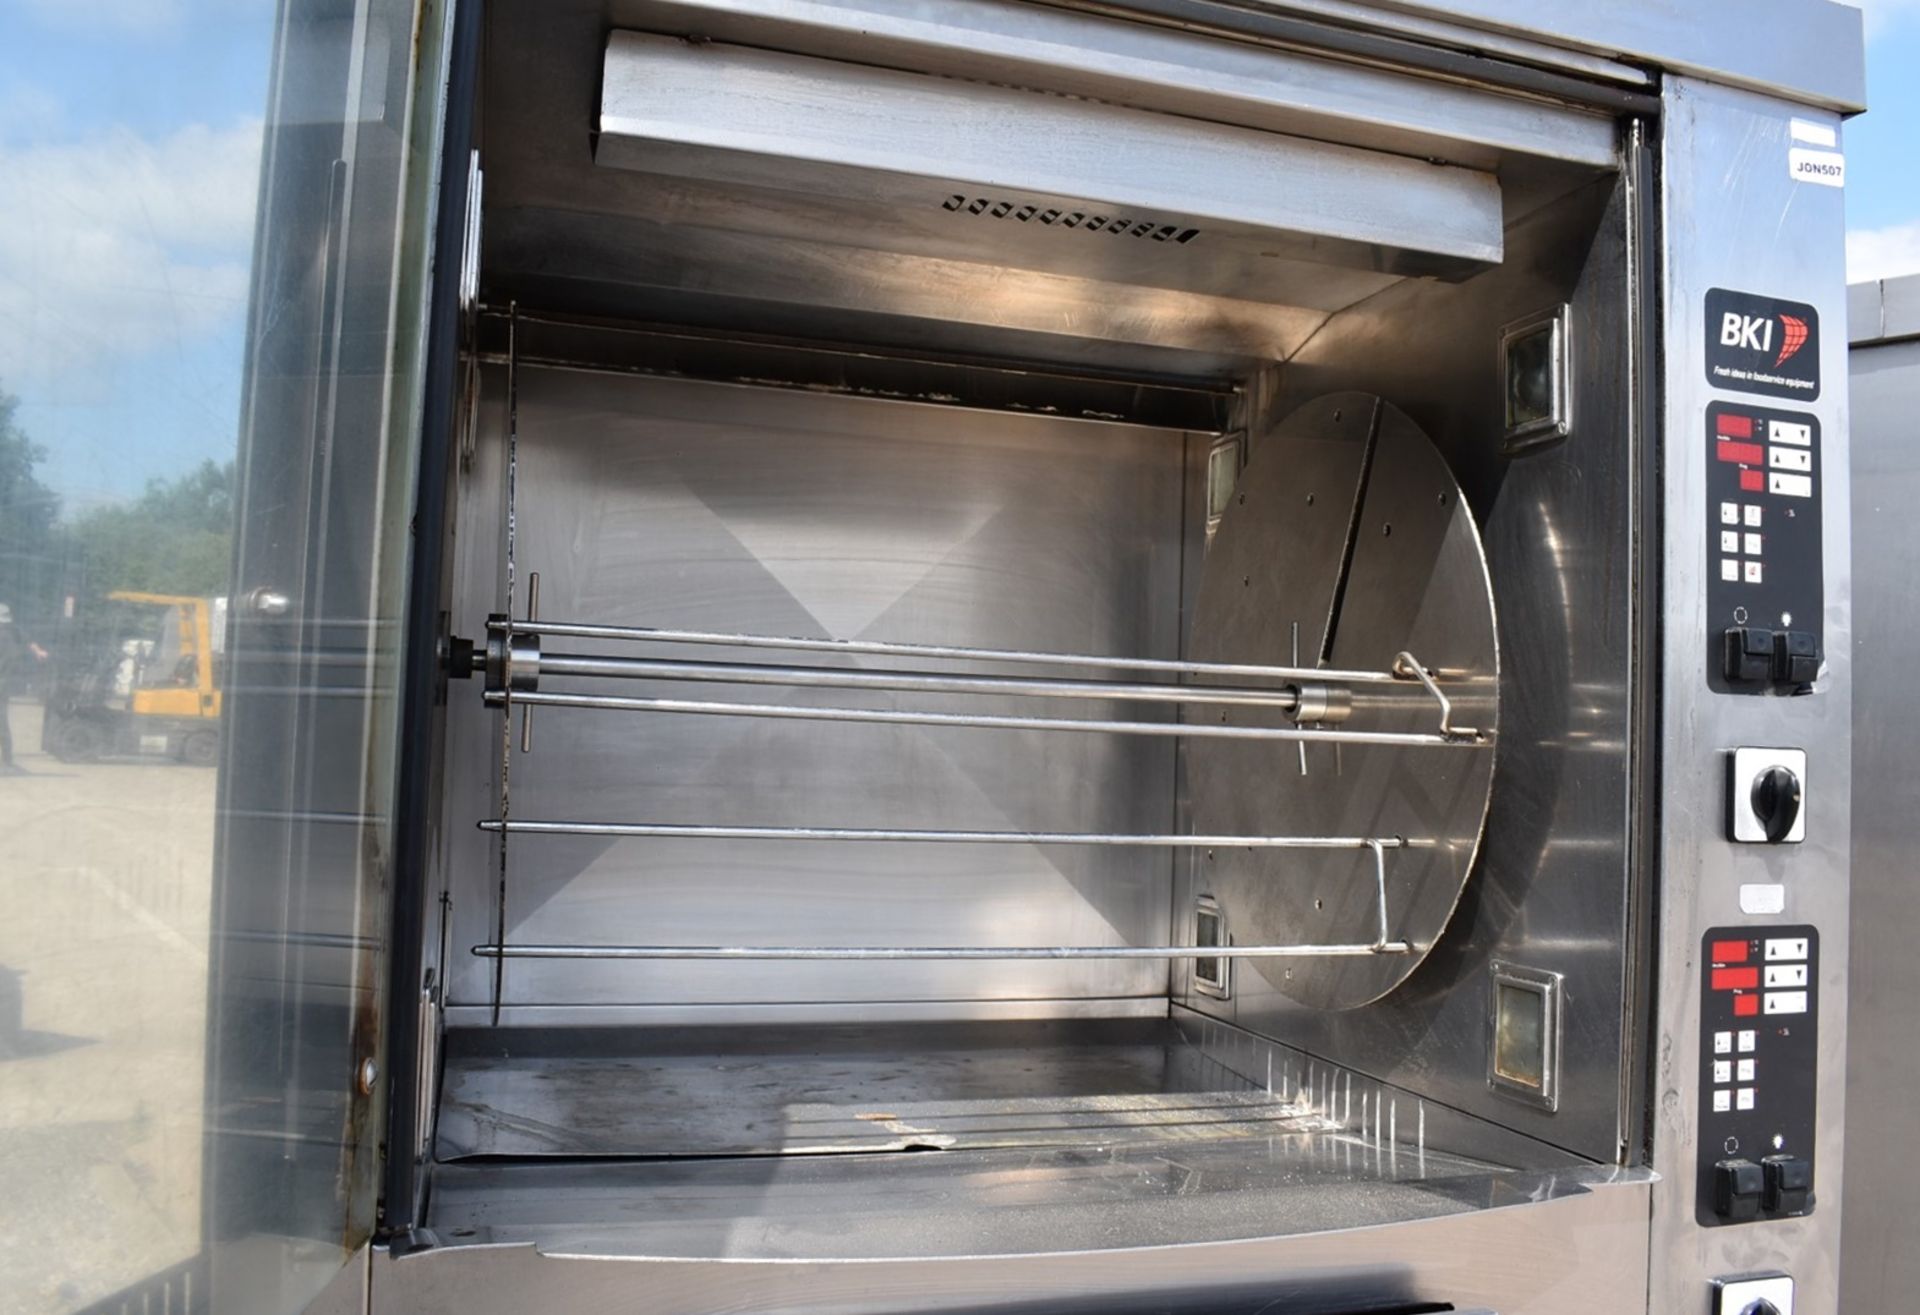 1 x BKI BBQ King Commercial Double Rotisserie Chicken Oven With Stand - Type VGUK16 - 3 Phase - Image 9 of 21